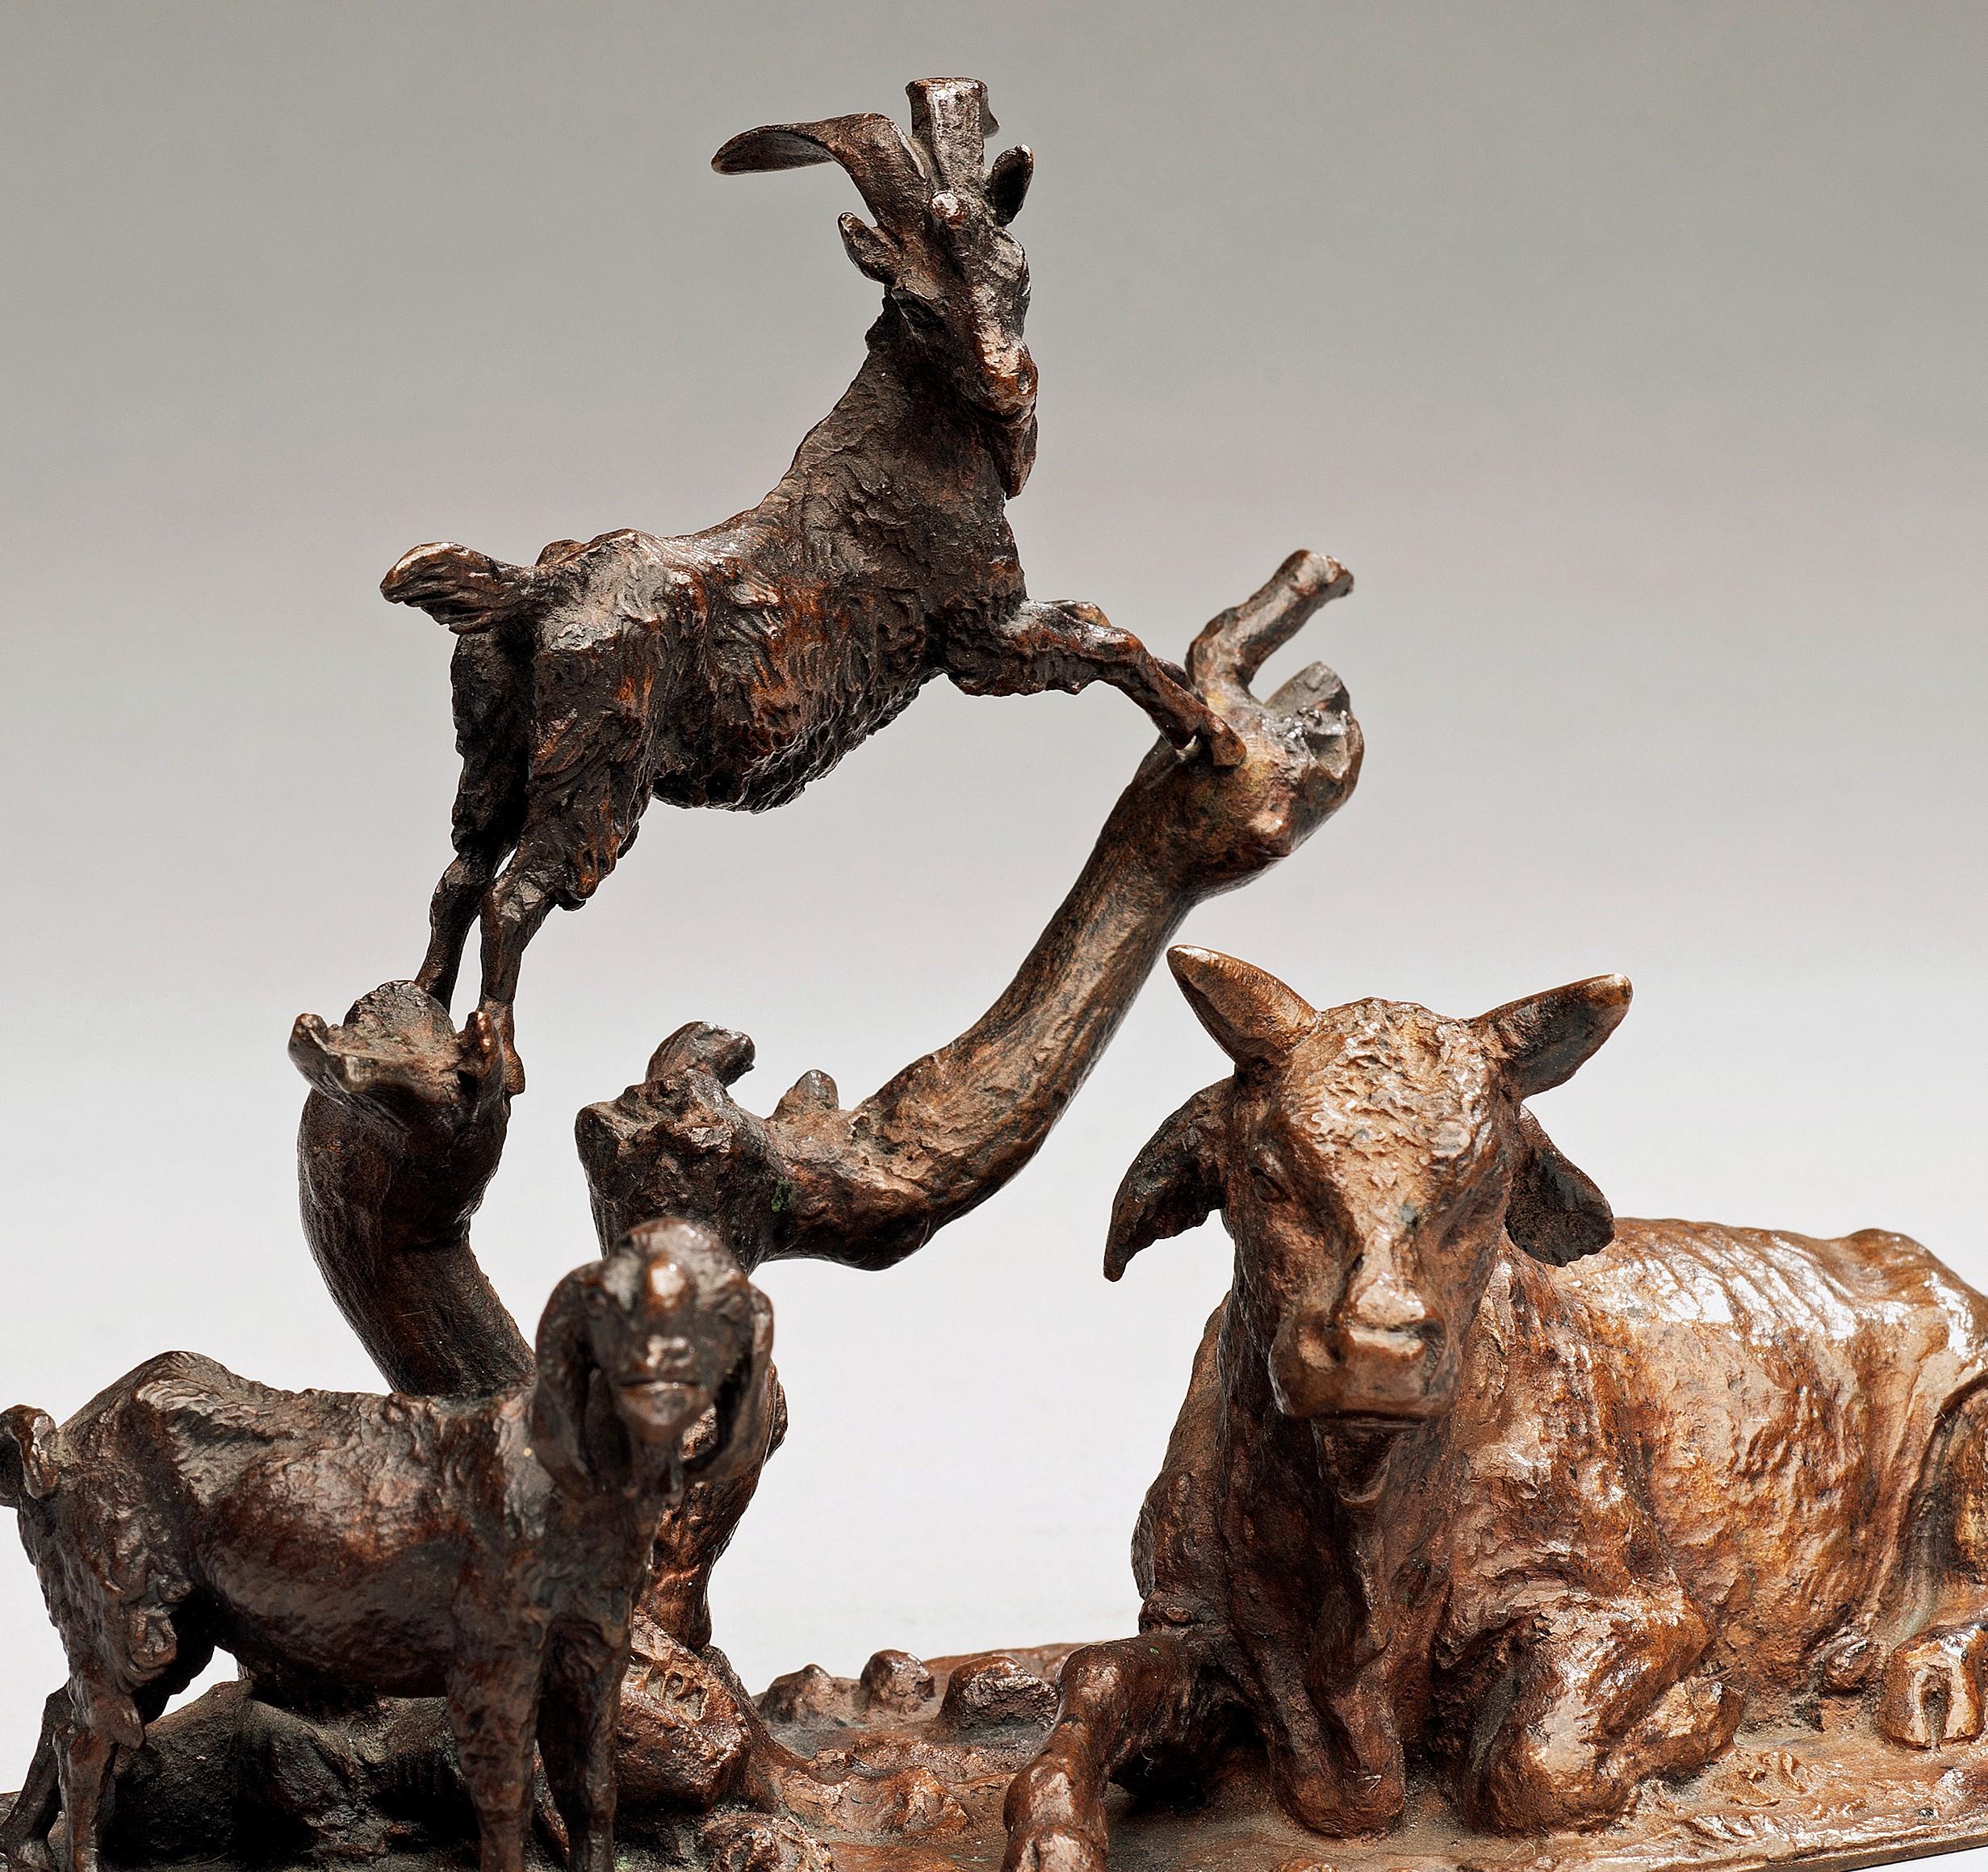 Antique Bronze Miniature Barnyard with a Bull, Sheep & Goat circa 1860, France - Gold Figurative Sculpture by Christopher Fratin